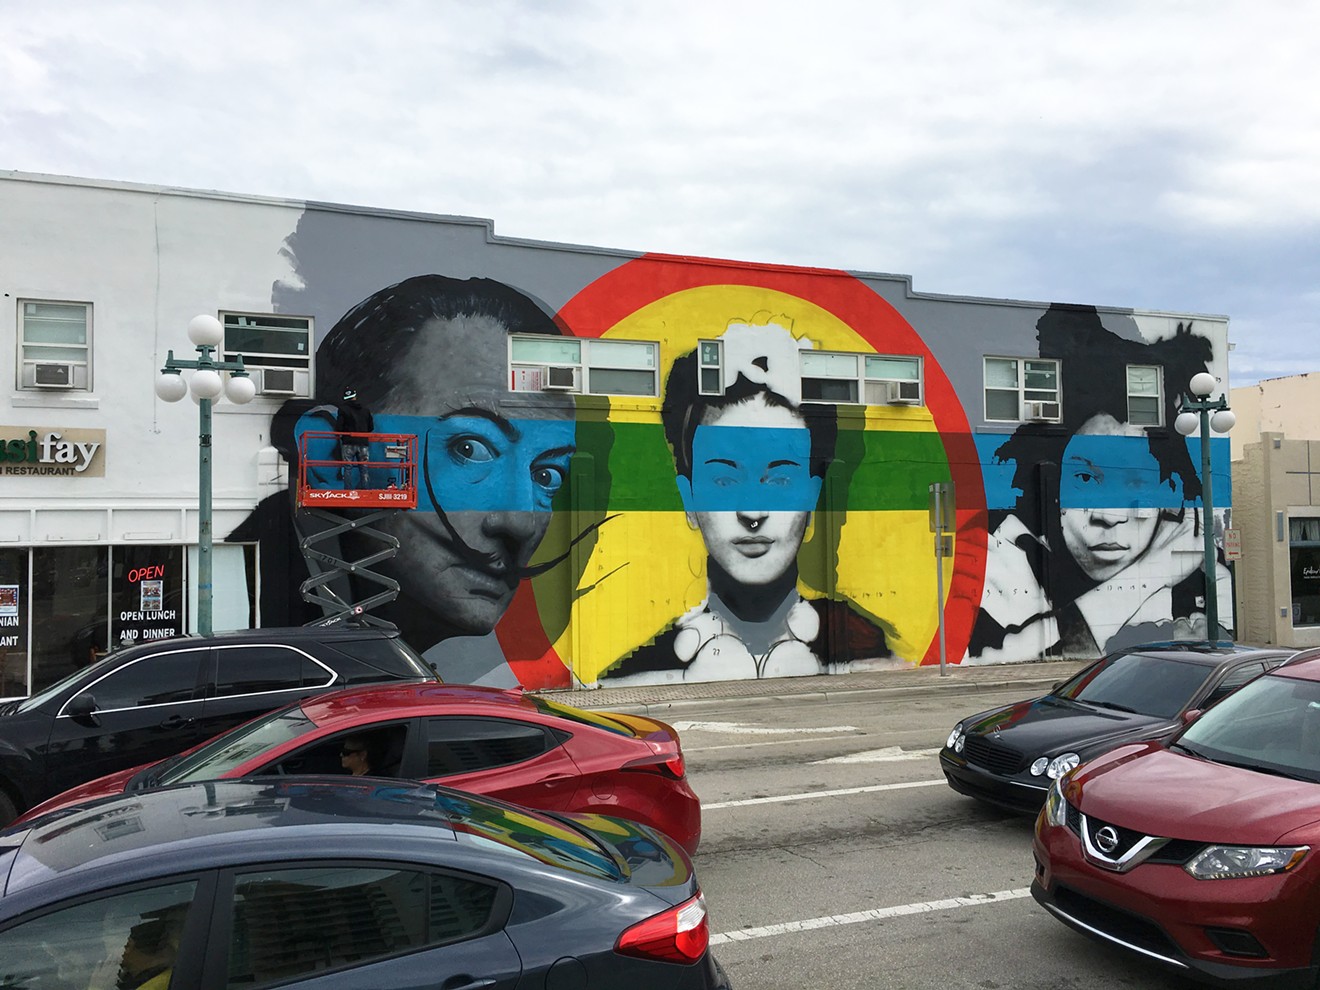 The Greater Fort Lauderdale CVB’s Film, Music, Fashion & Create division recently launched its Underground Create Map of Broward County's arts and cultural scene. Pictured here is the Downtown Hollywood Mural Project.